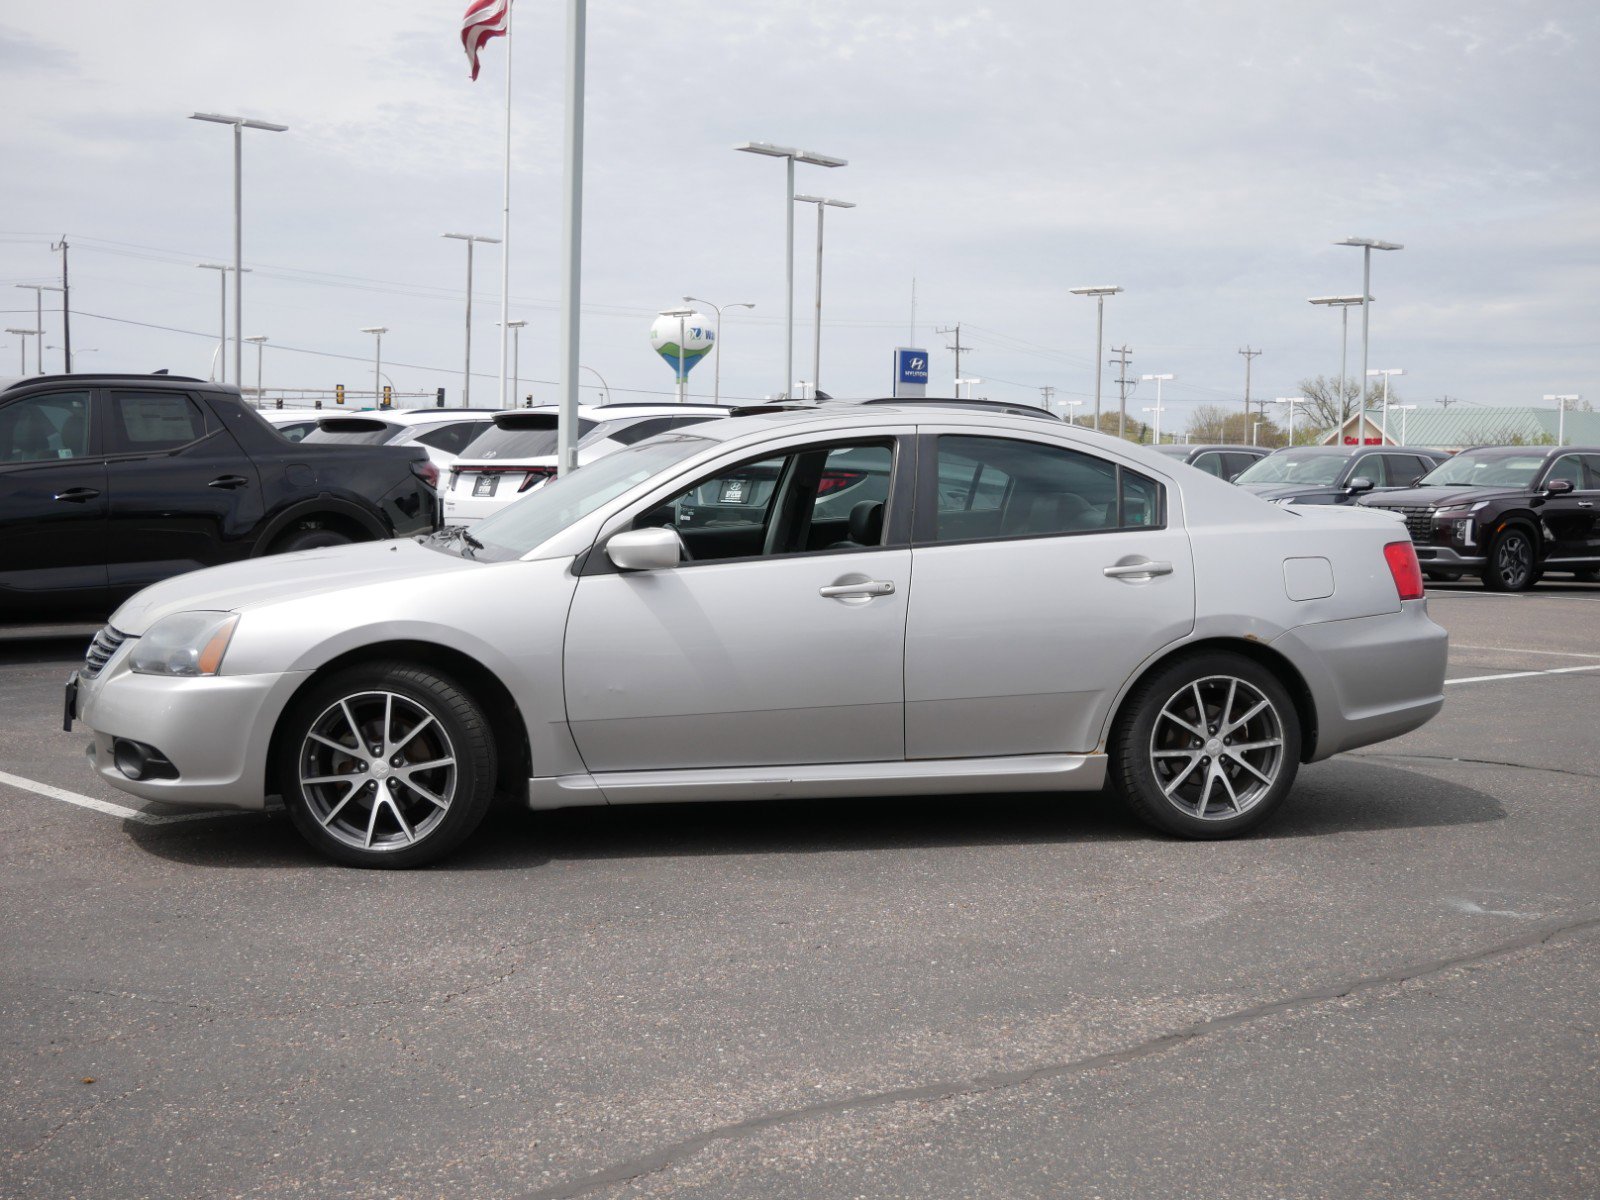 Used 2009 Mitsubishi Galant Ralliart with VIN 4A3AB76T49E002713 for sale in Waite Park, Minnesota